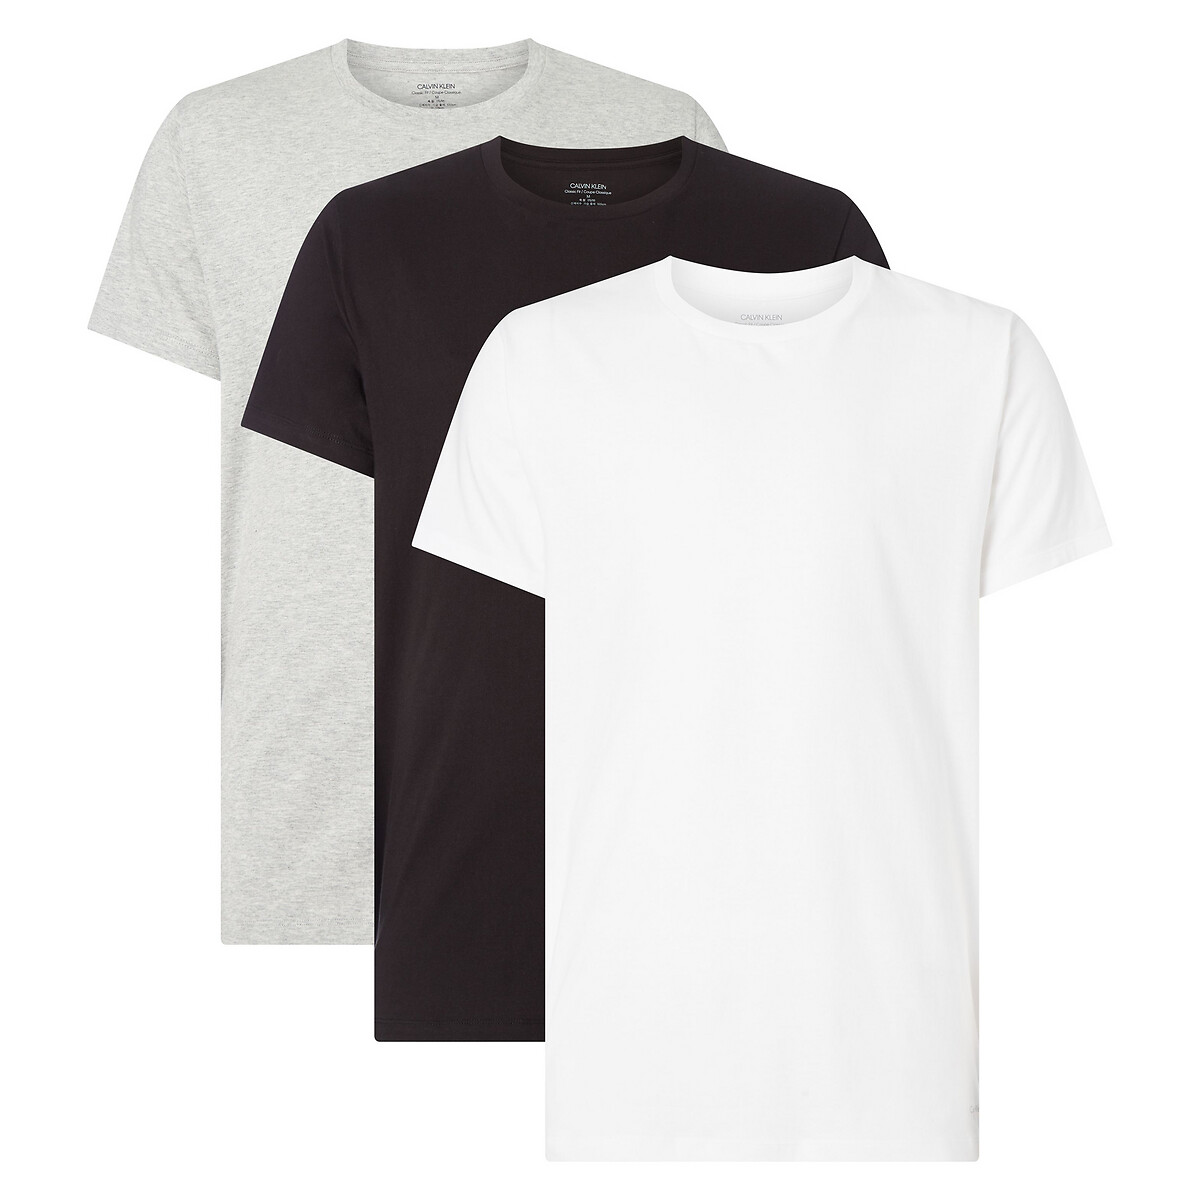 Image of Pack of 3 T-Shirts in Plain Cotton